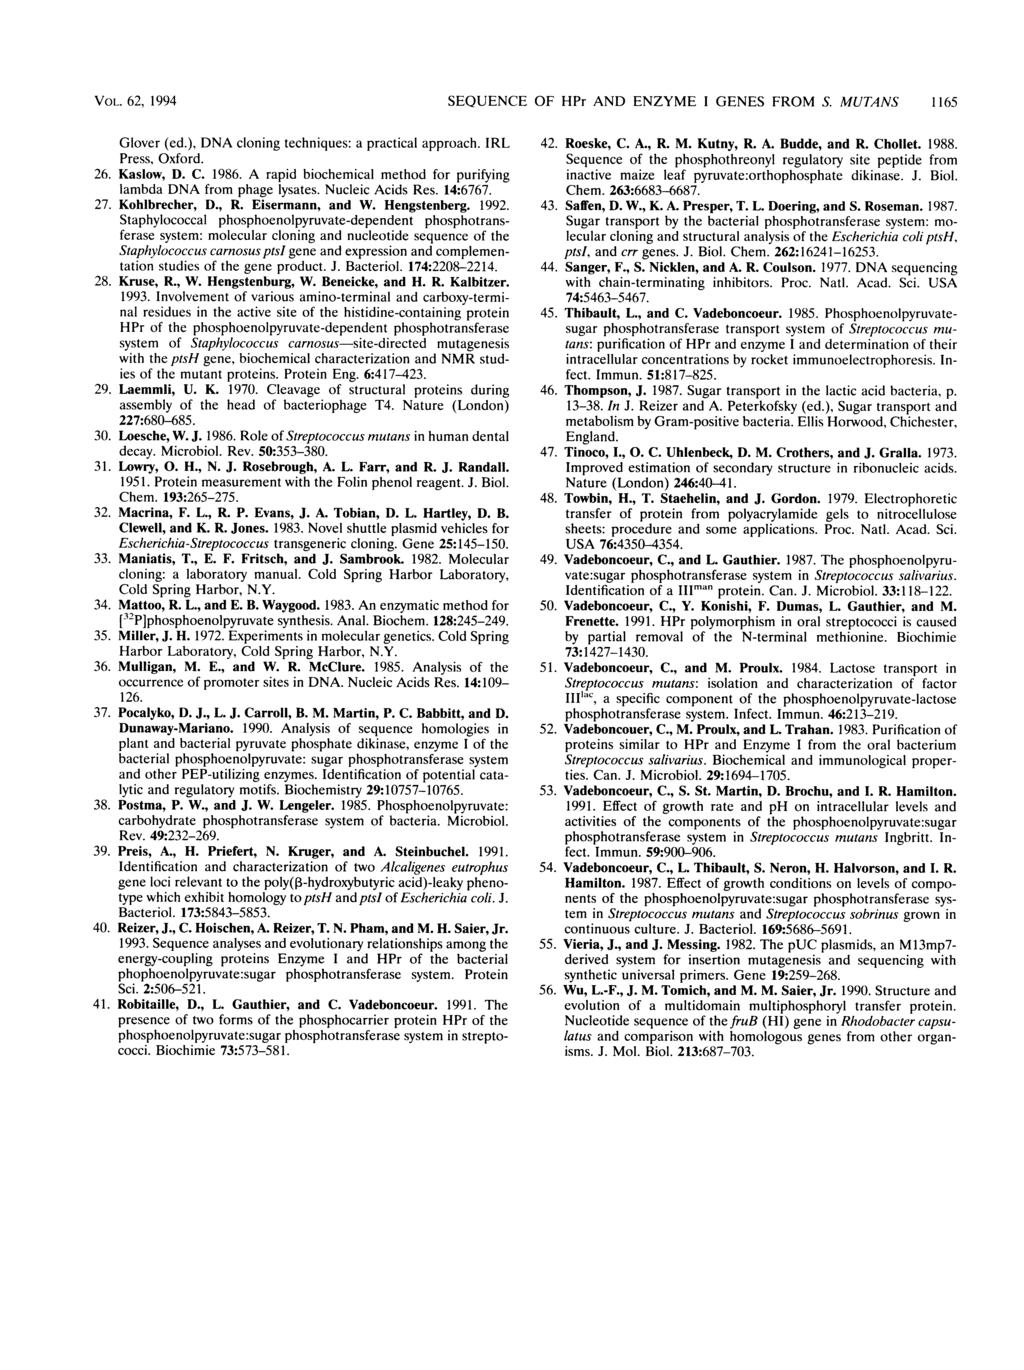 VOL. 62, 1994 SEQUENCE OF HPr AND ENZYME I GENES FROM S. MUTANS 1165 Glover (ed.), DNA cloning techniques: a practical approach. IRL Press, Oxford. 26. Kaslow, D. C. 1986.